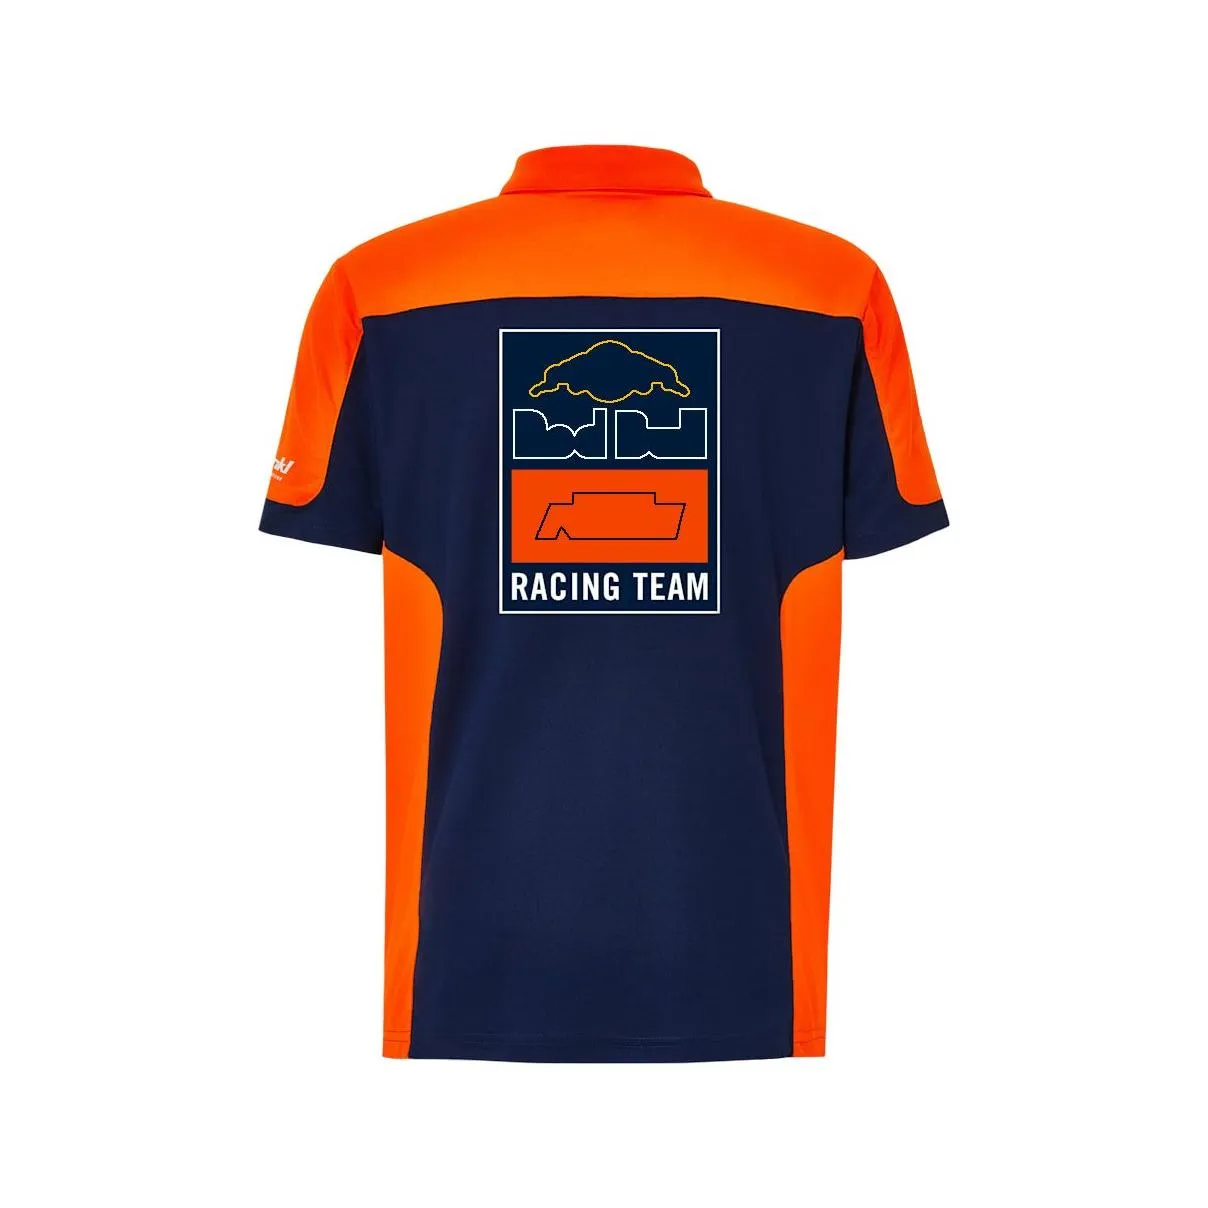 racing team men`s polo shirt outdoor breathable quick-drying t-shirt high-quality plus-size motorcycle clothes car logo customization